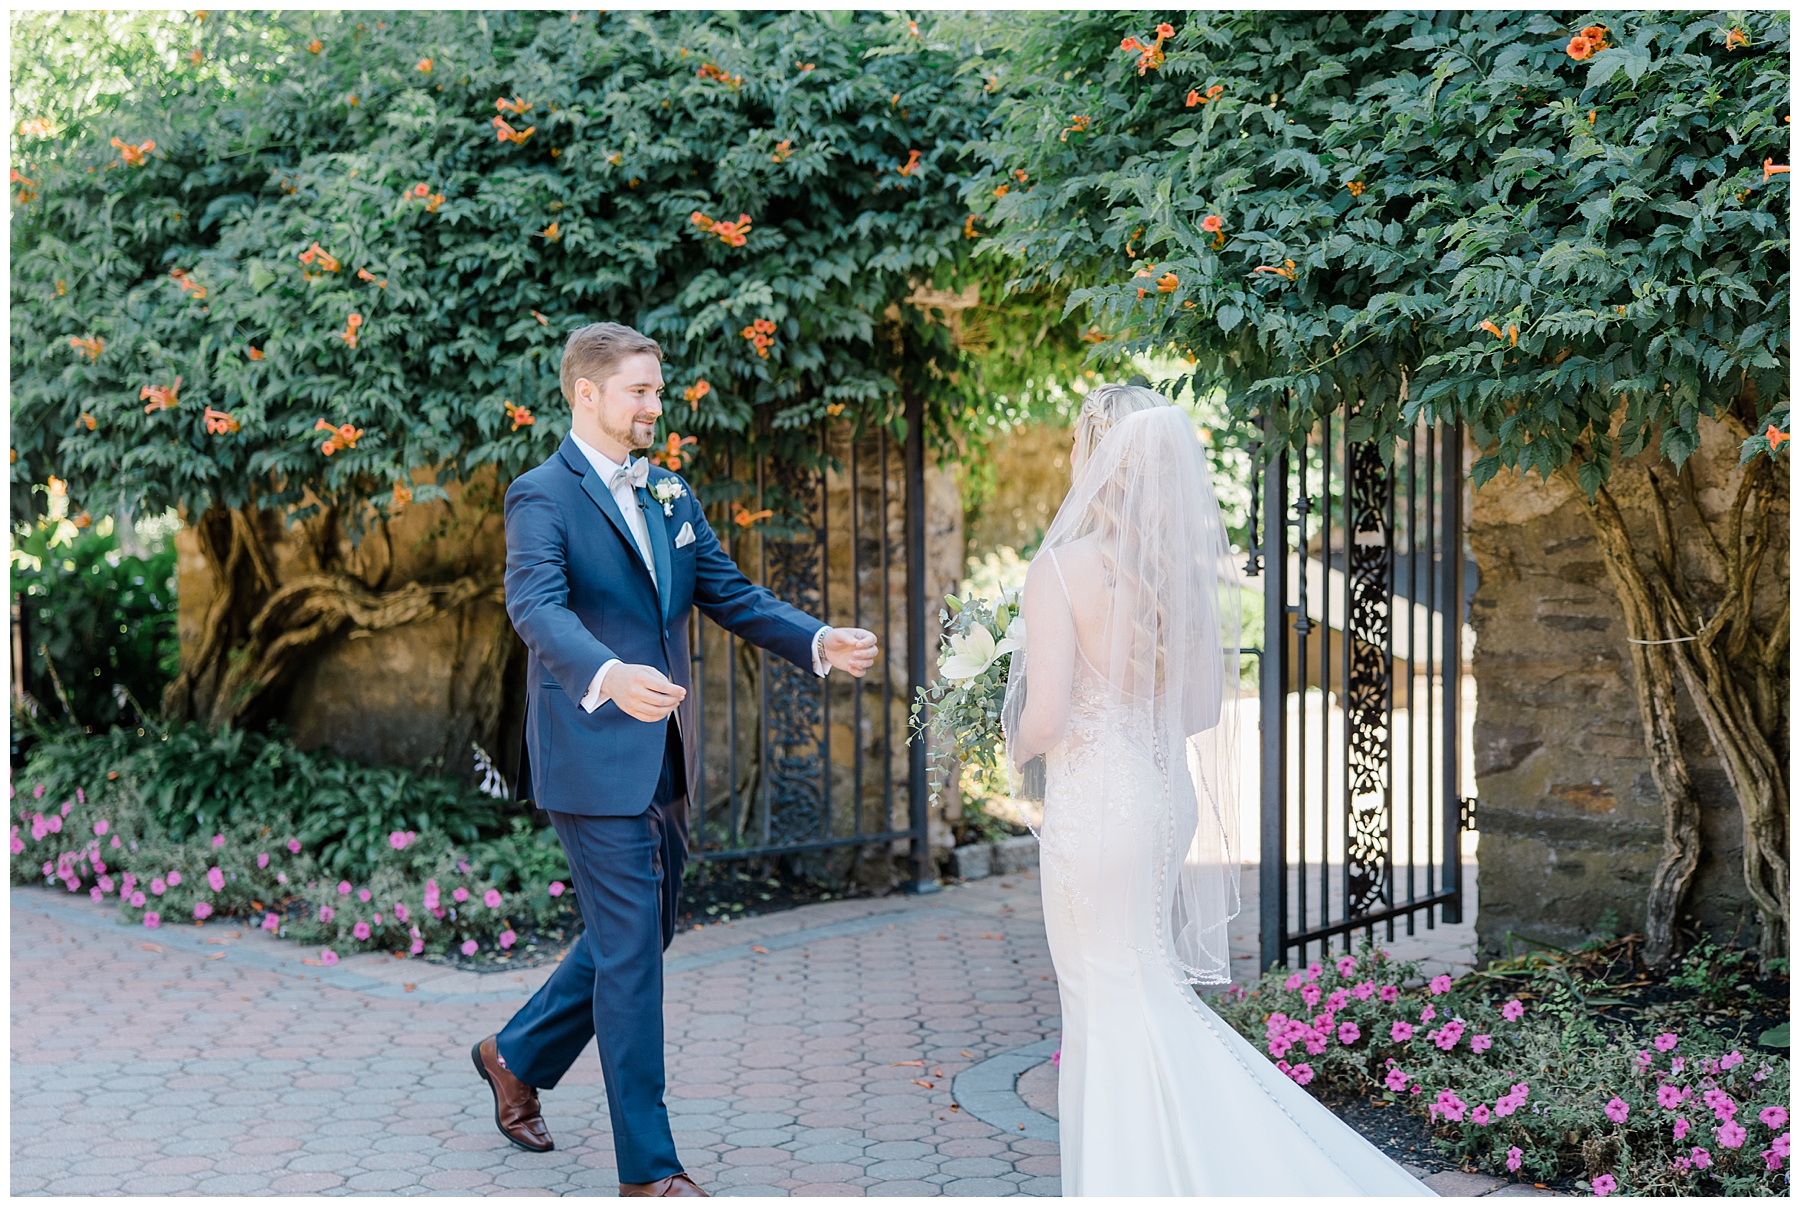 first look between bride and groom at Saint Clements Castle Fairytale Wedding in Connecticut